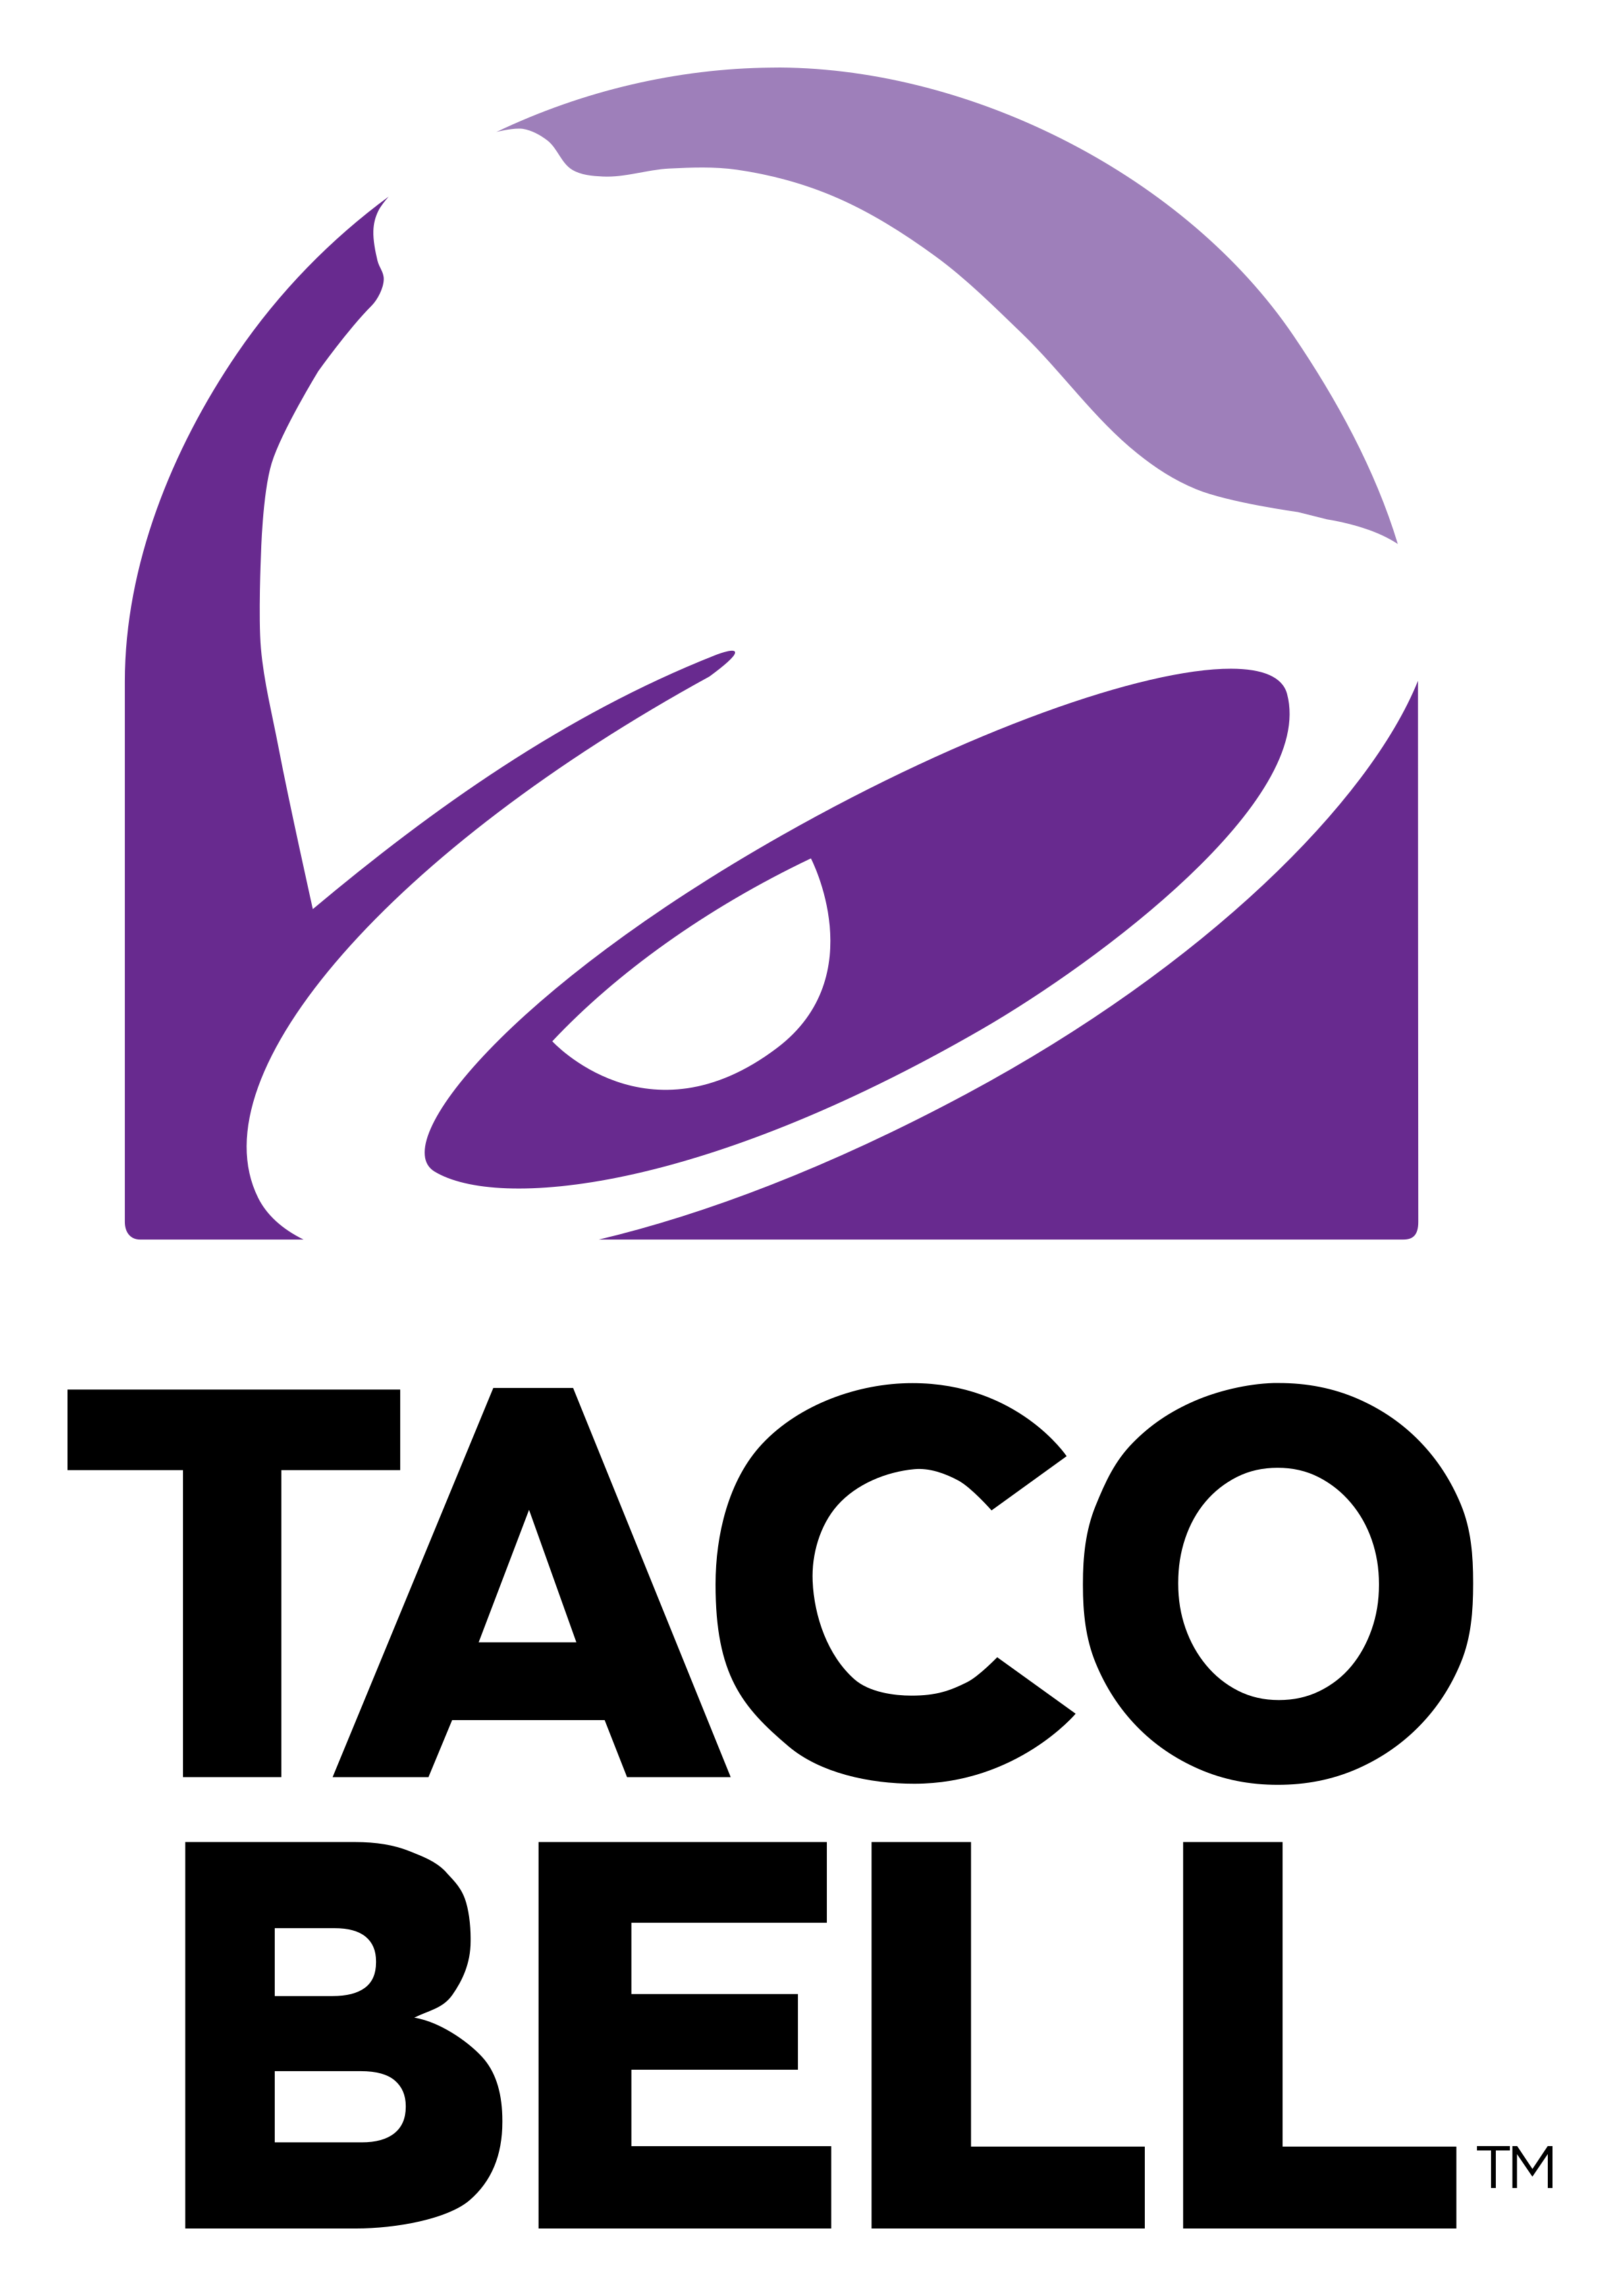 taco bell logo 3.png